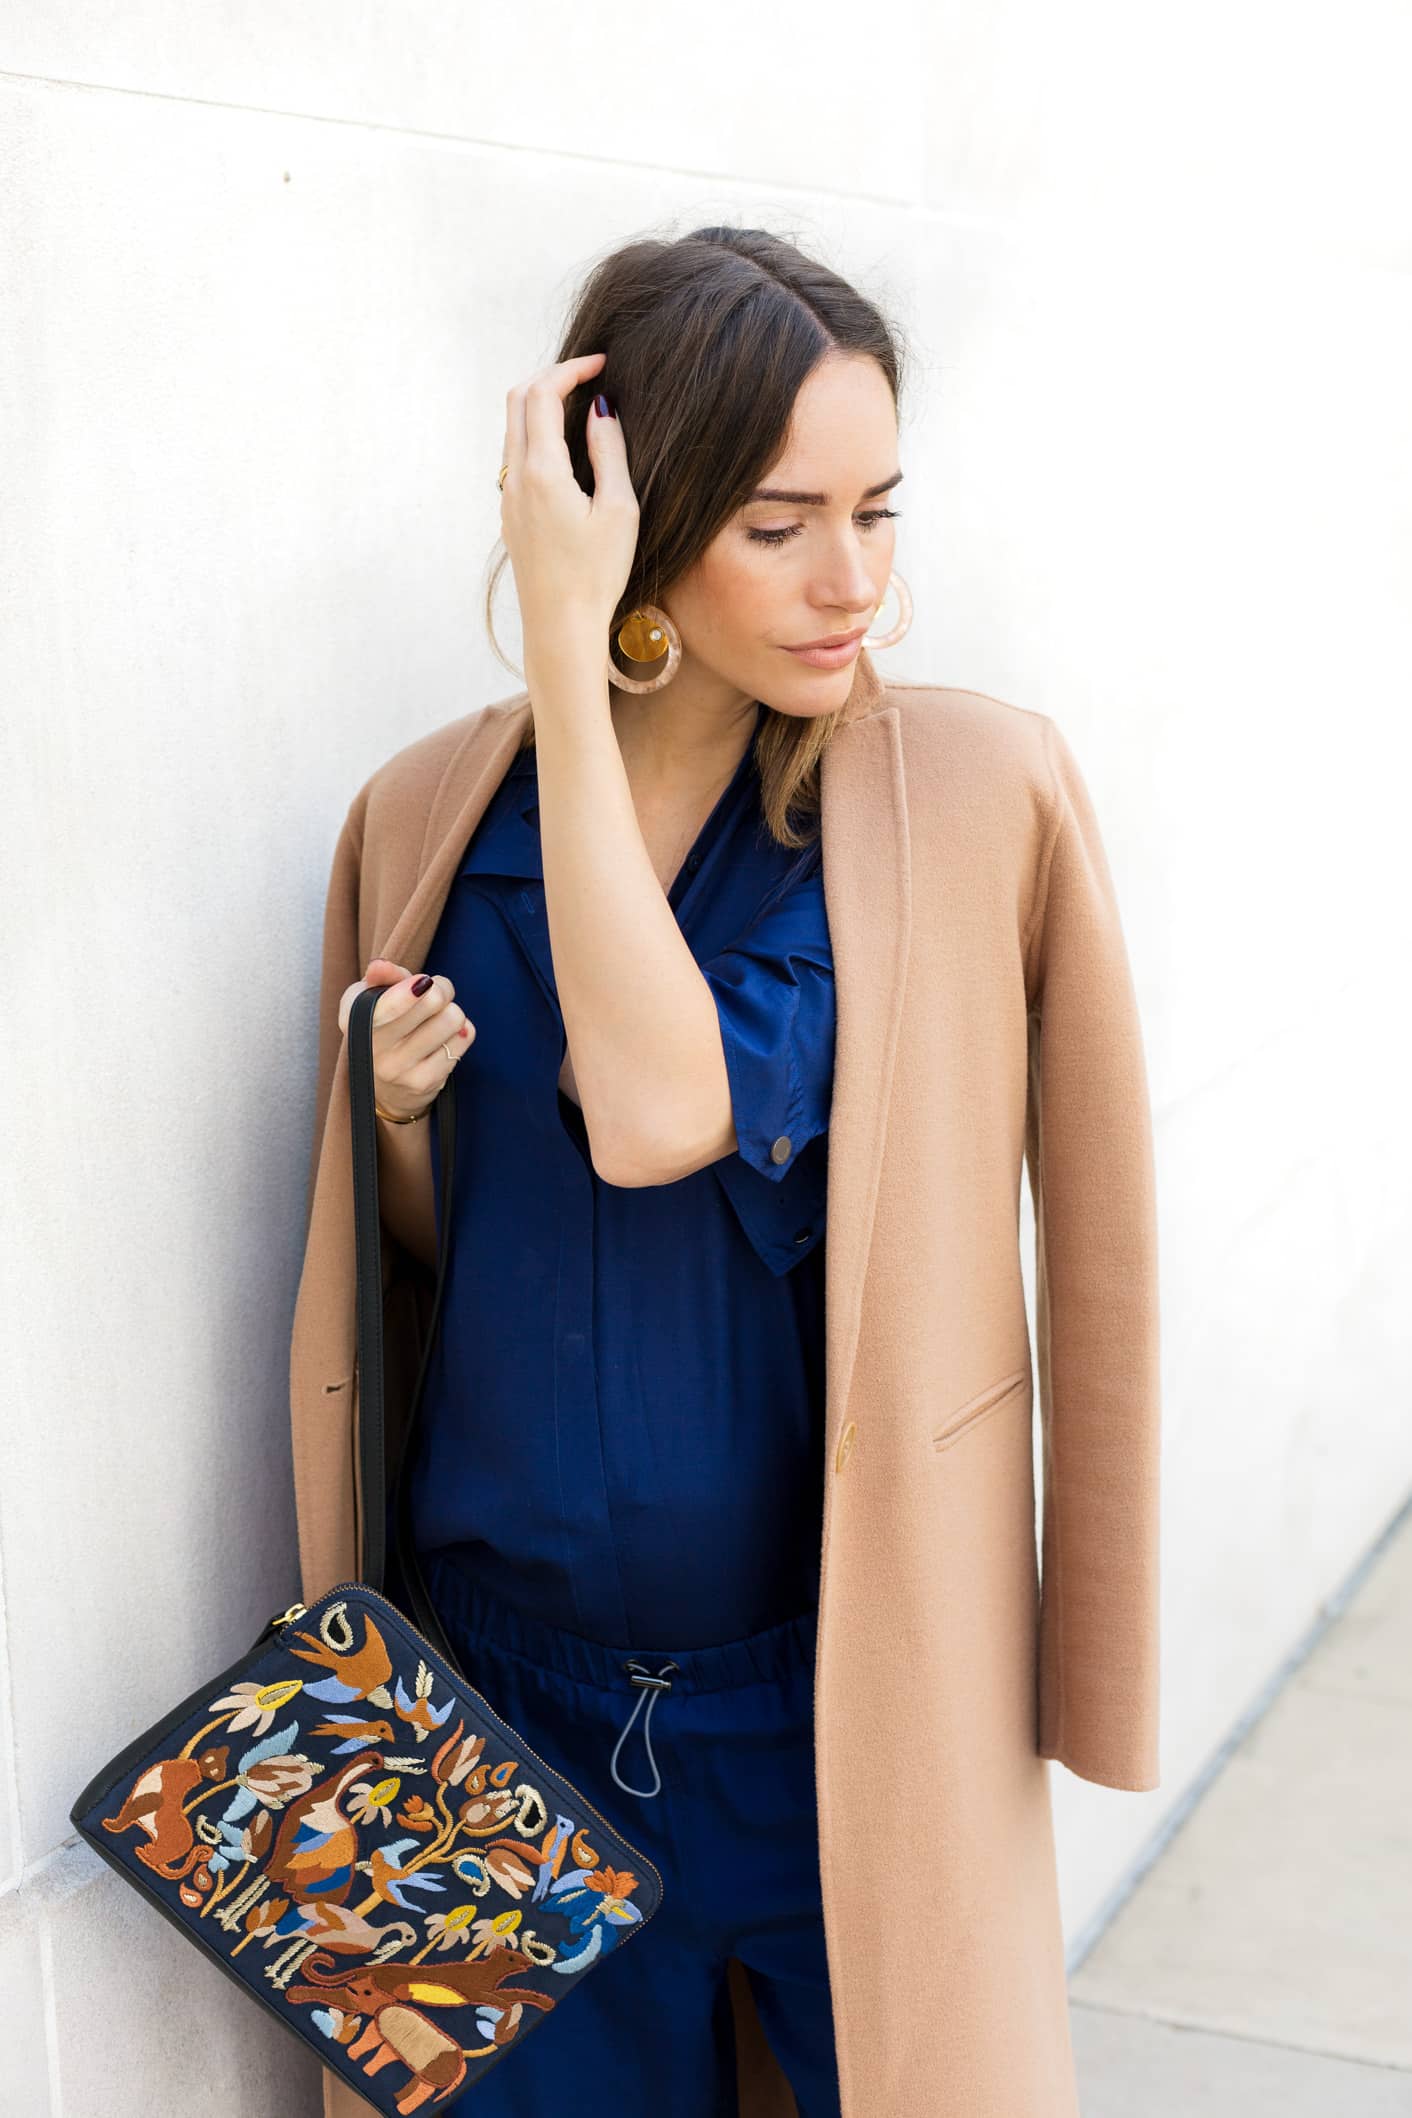 Louise Roe wearing a camel coat and blue pantsuit for fall